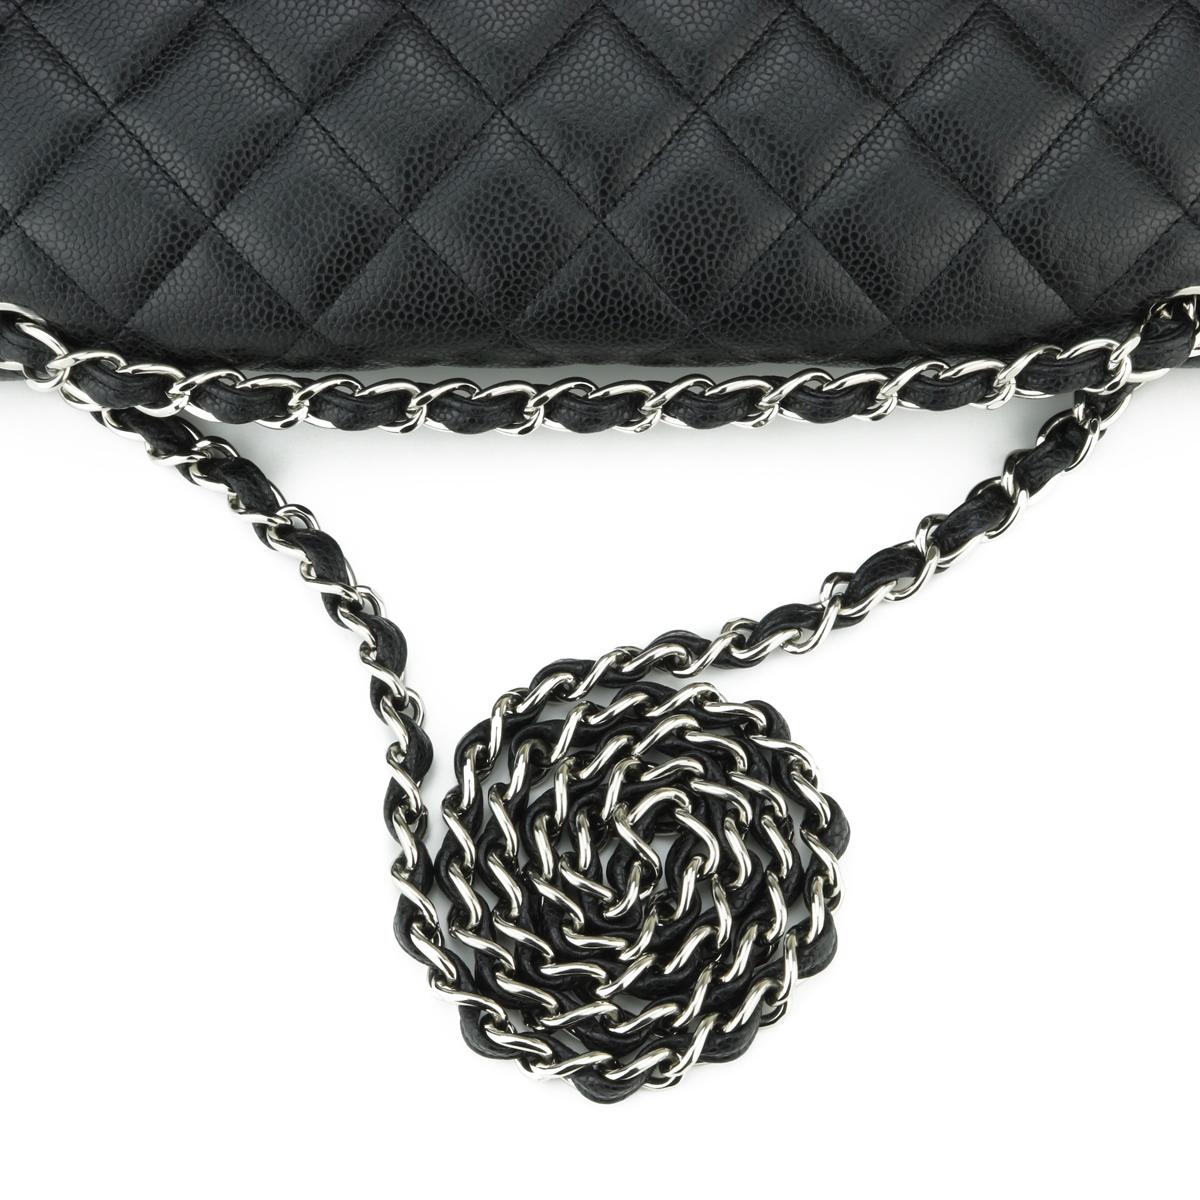 CHANEL Double Flap Maxi Bag Black Caviar with Silver Hardware 2014 For Sale 8